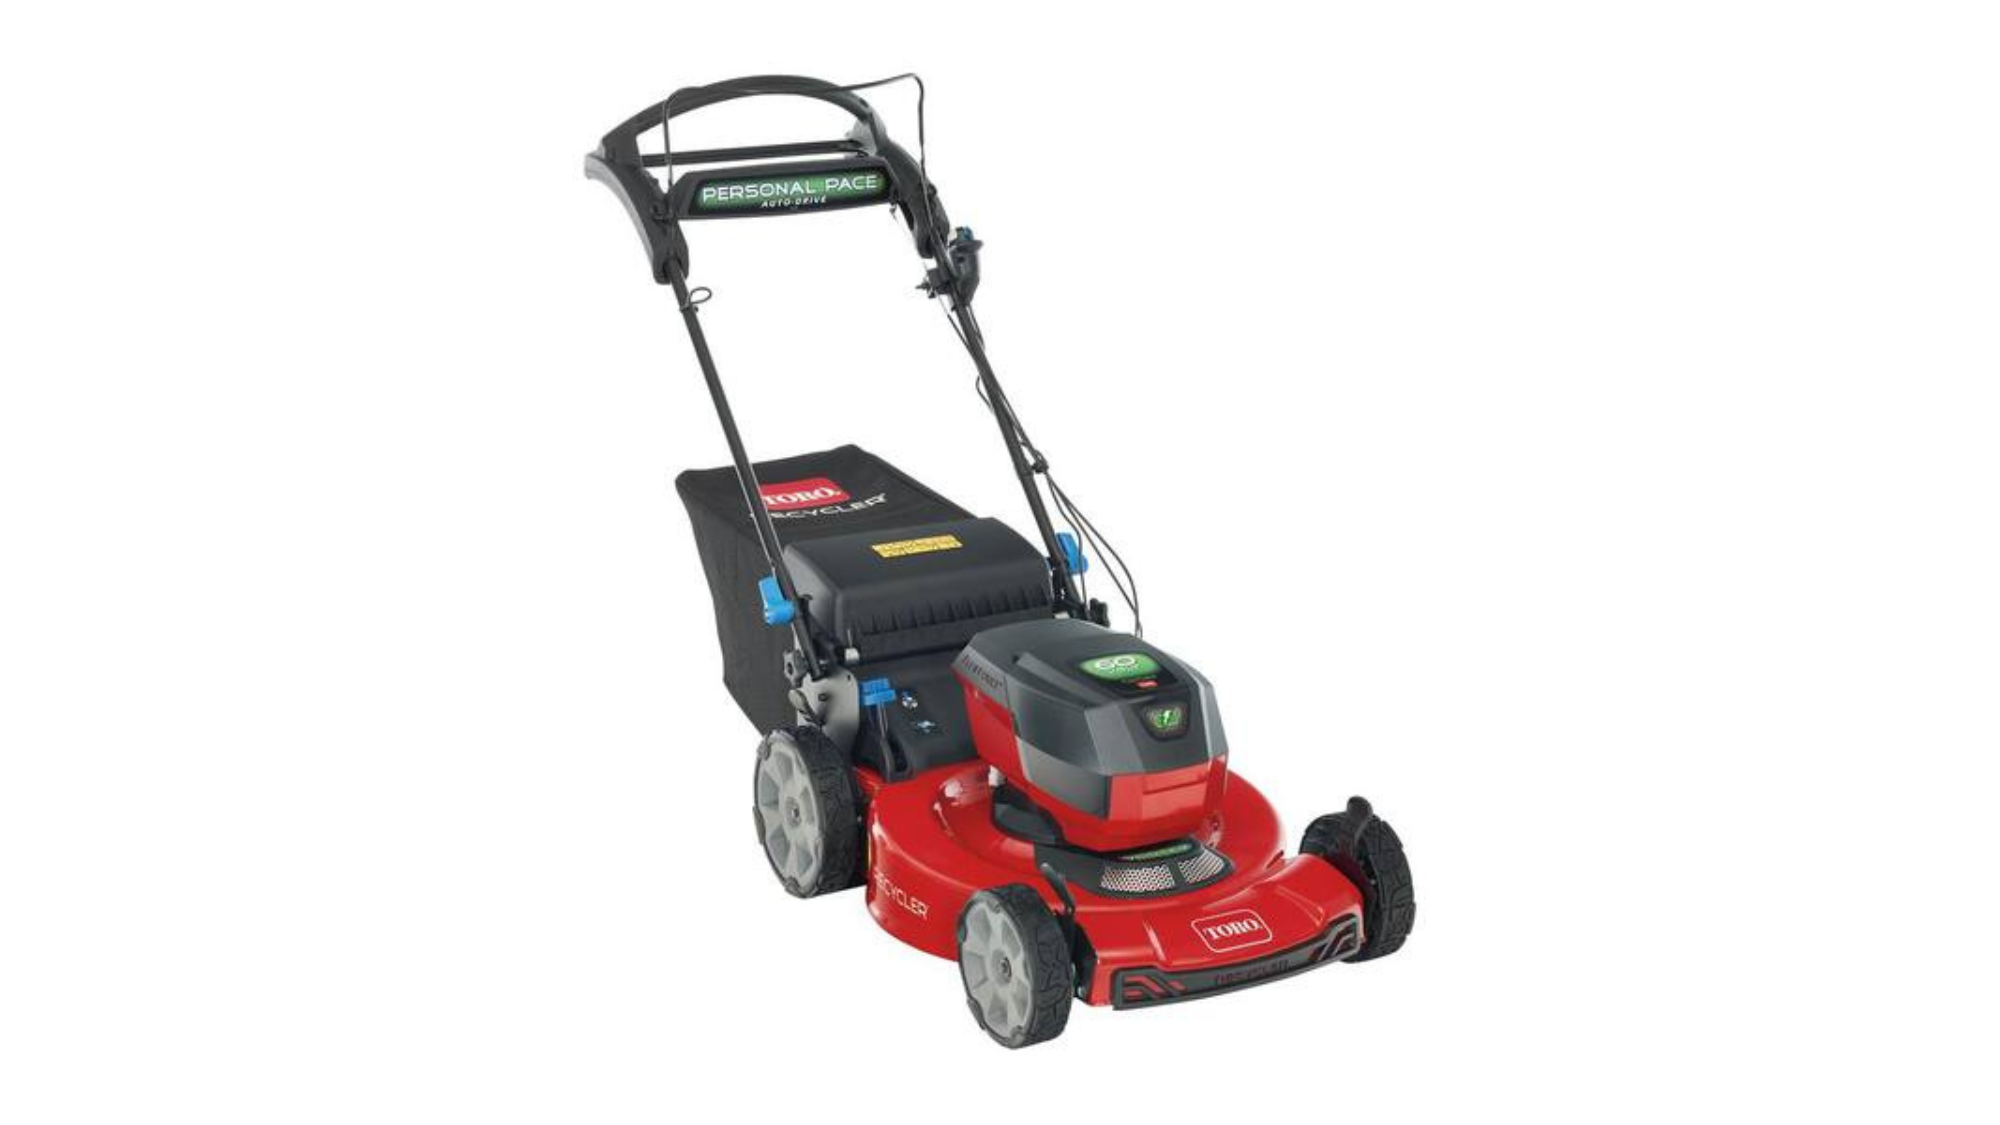 red Toro 21466T self-propelled walk-behind lawn mower on white background